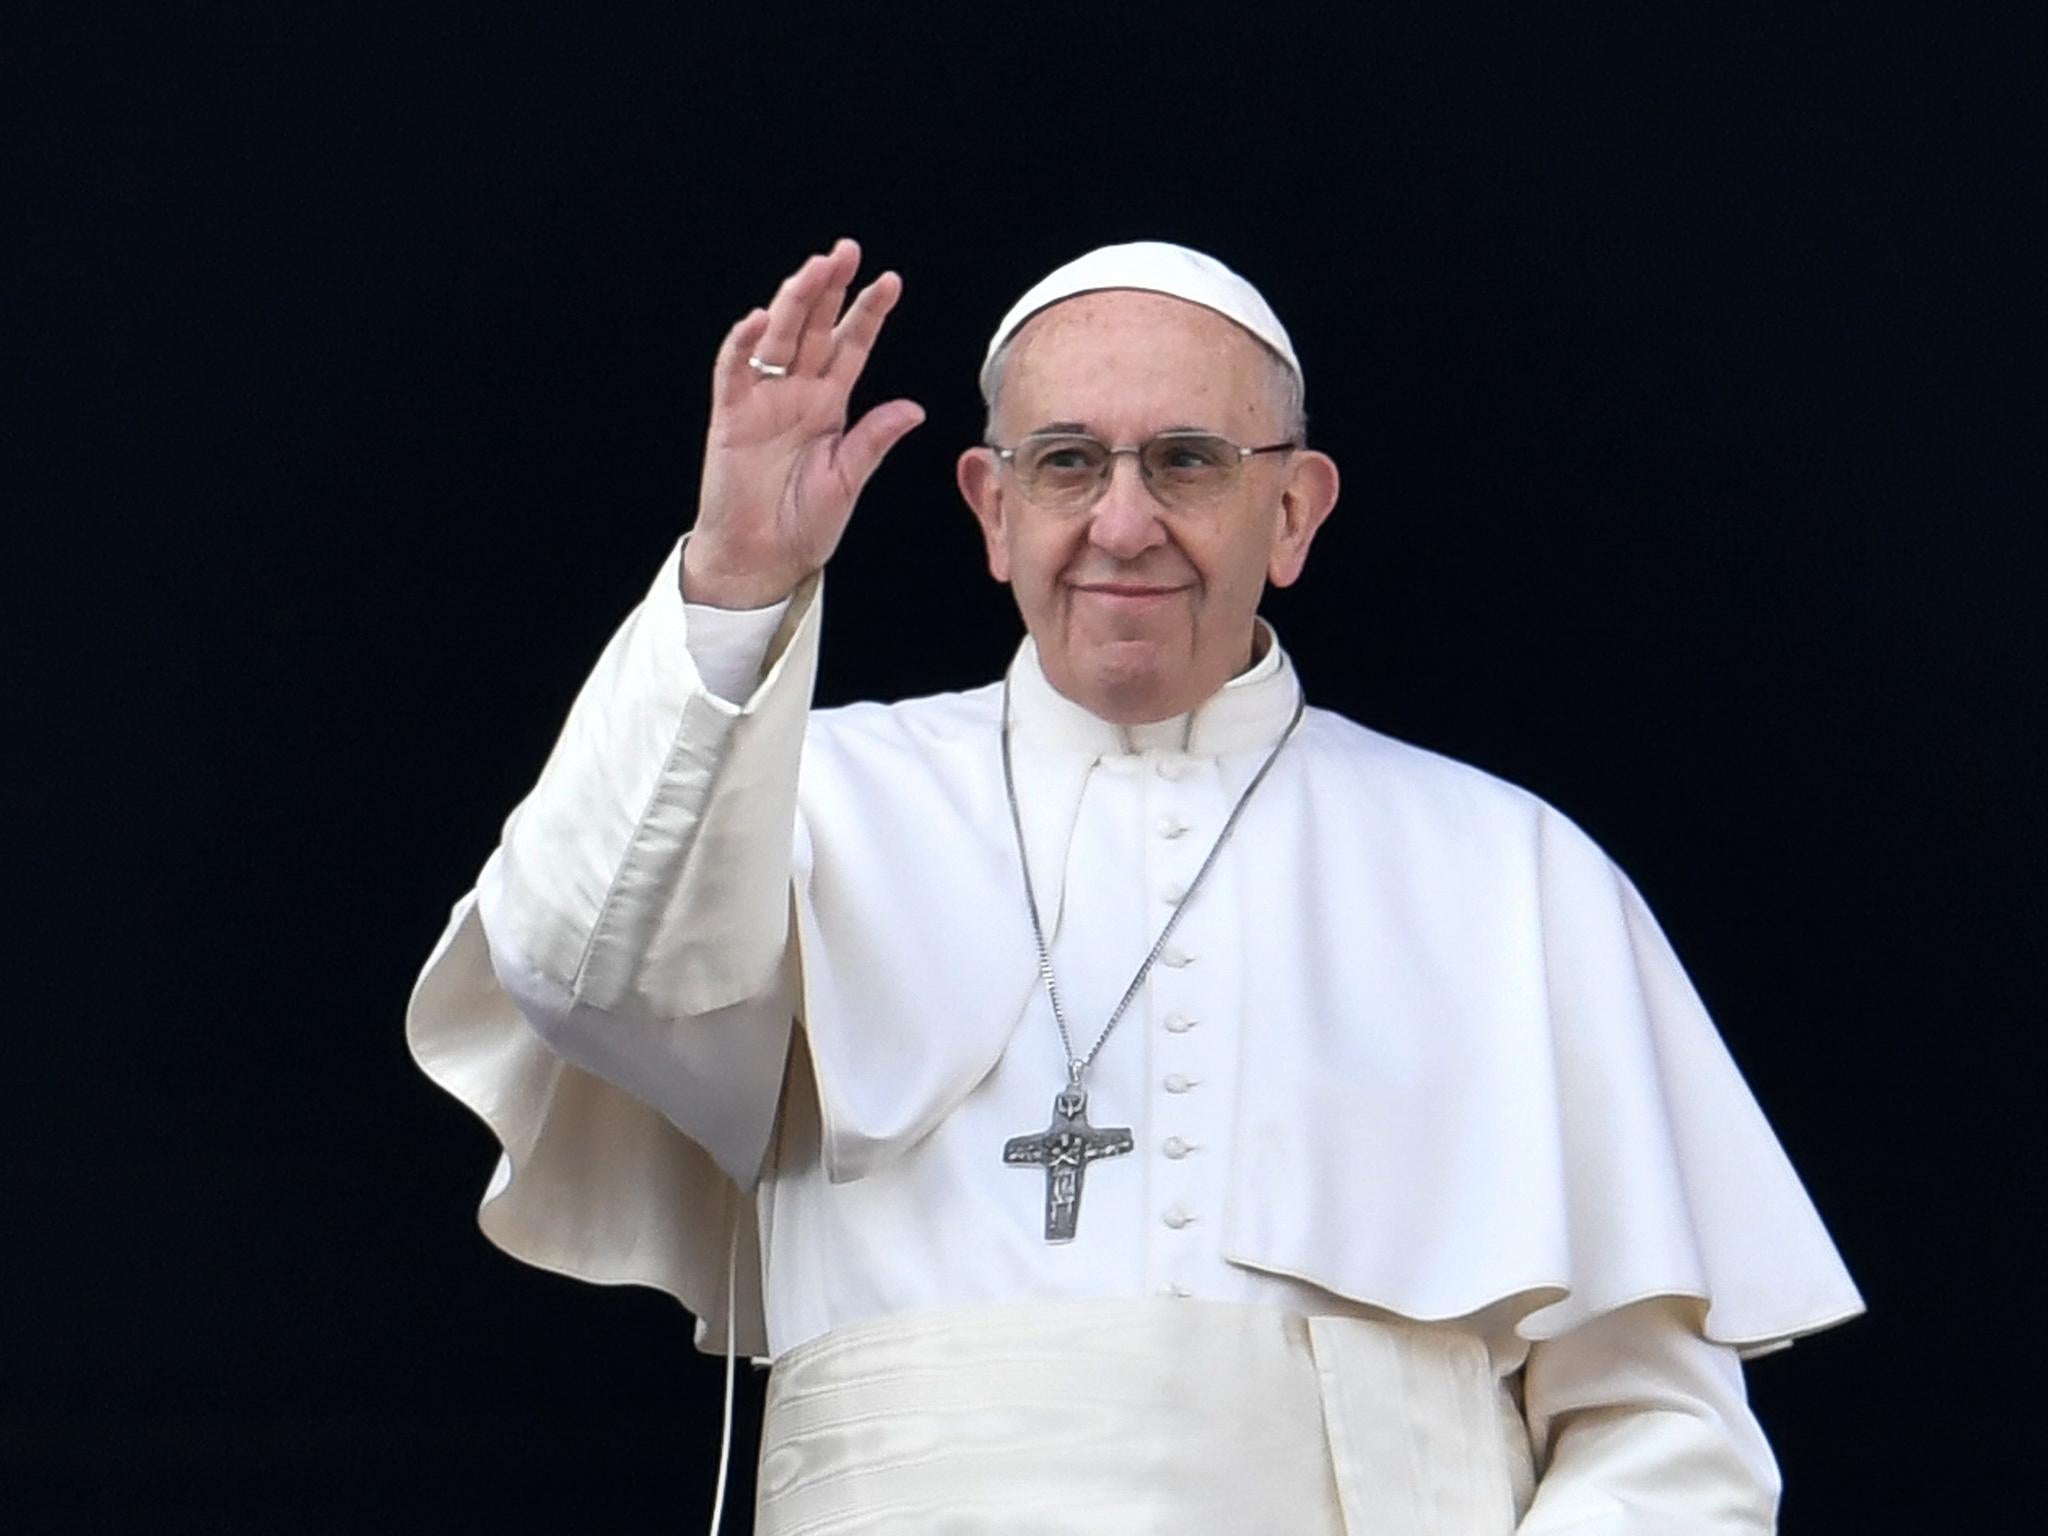 Pope Francis has been criticised by conservative elements of the Catholic Church